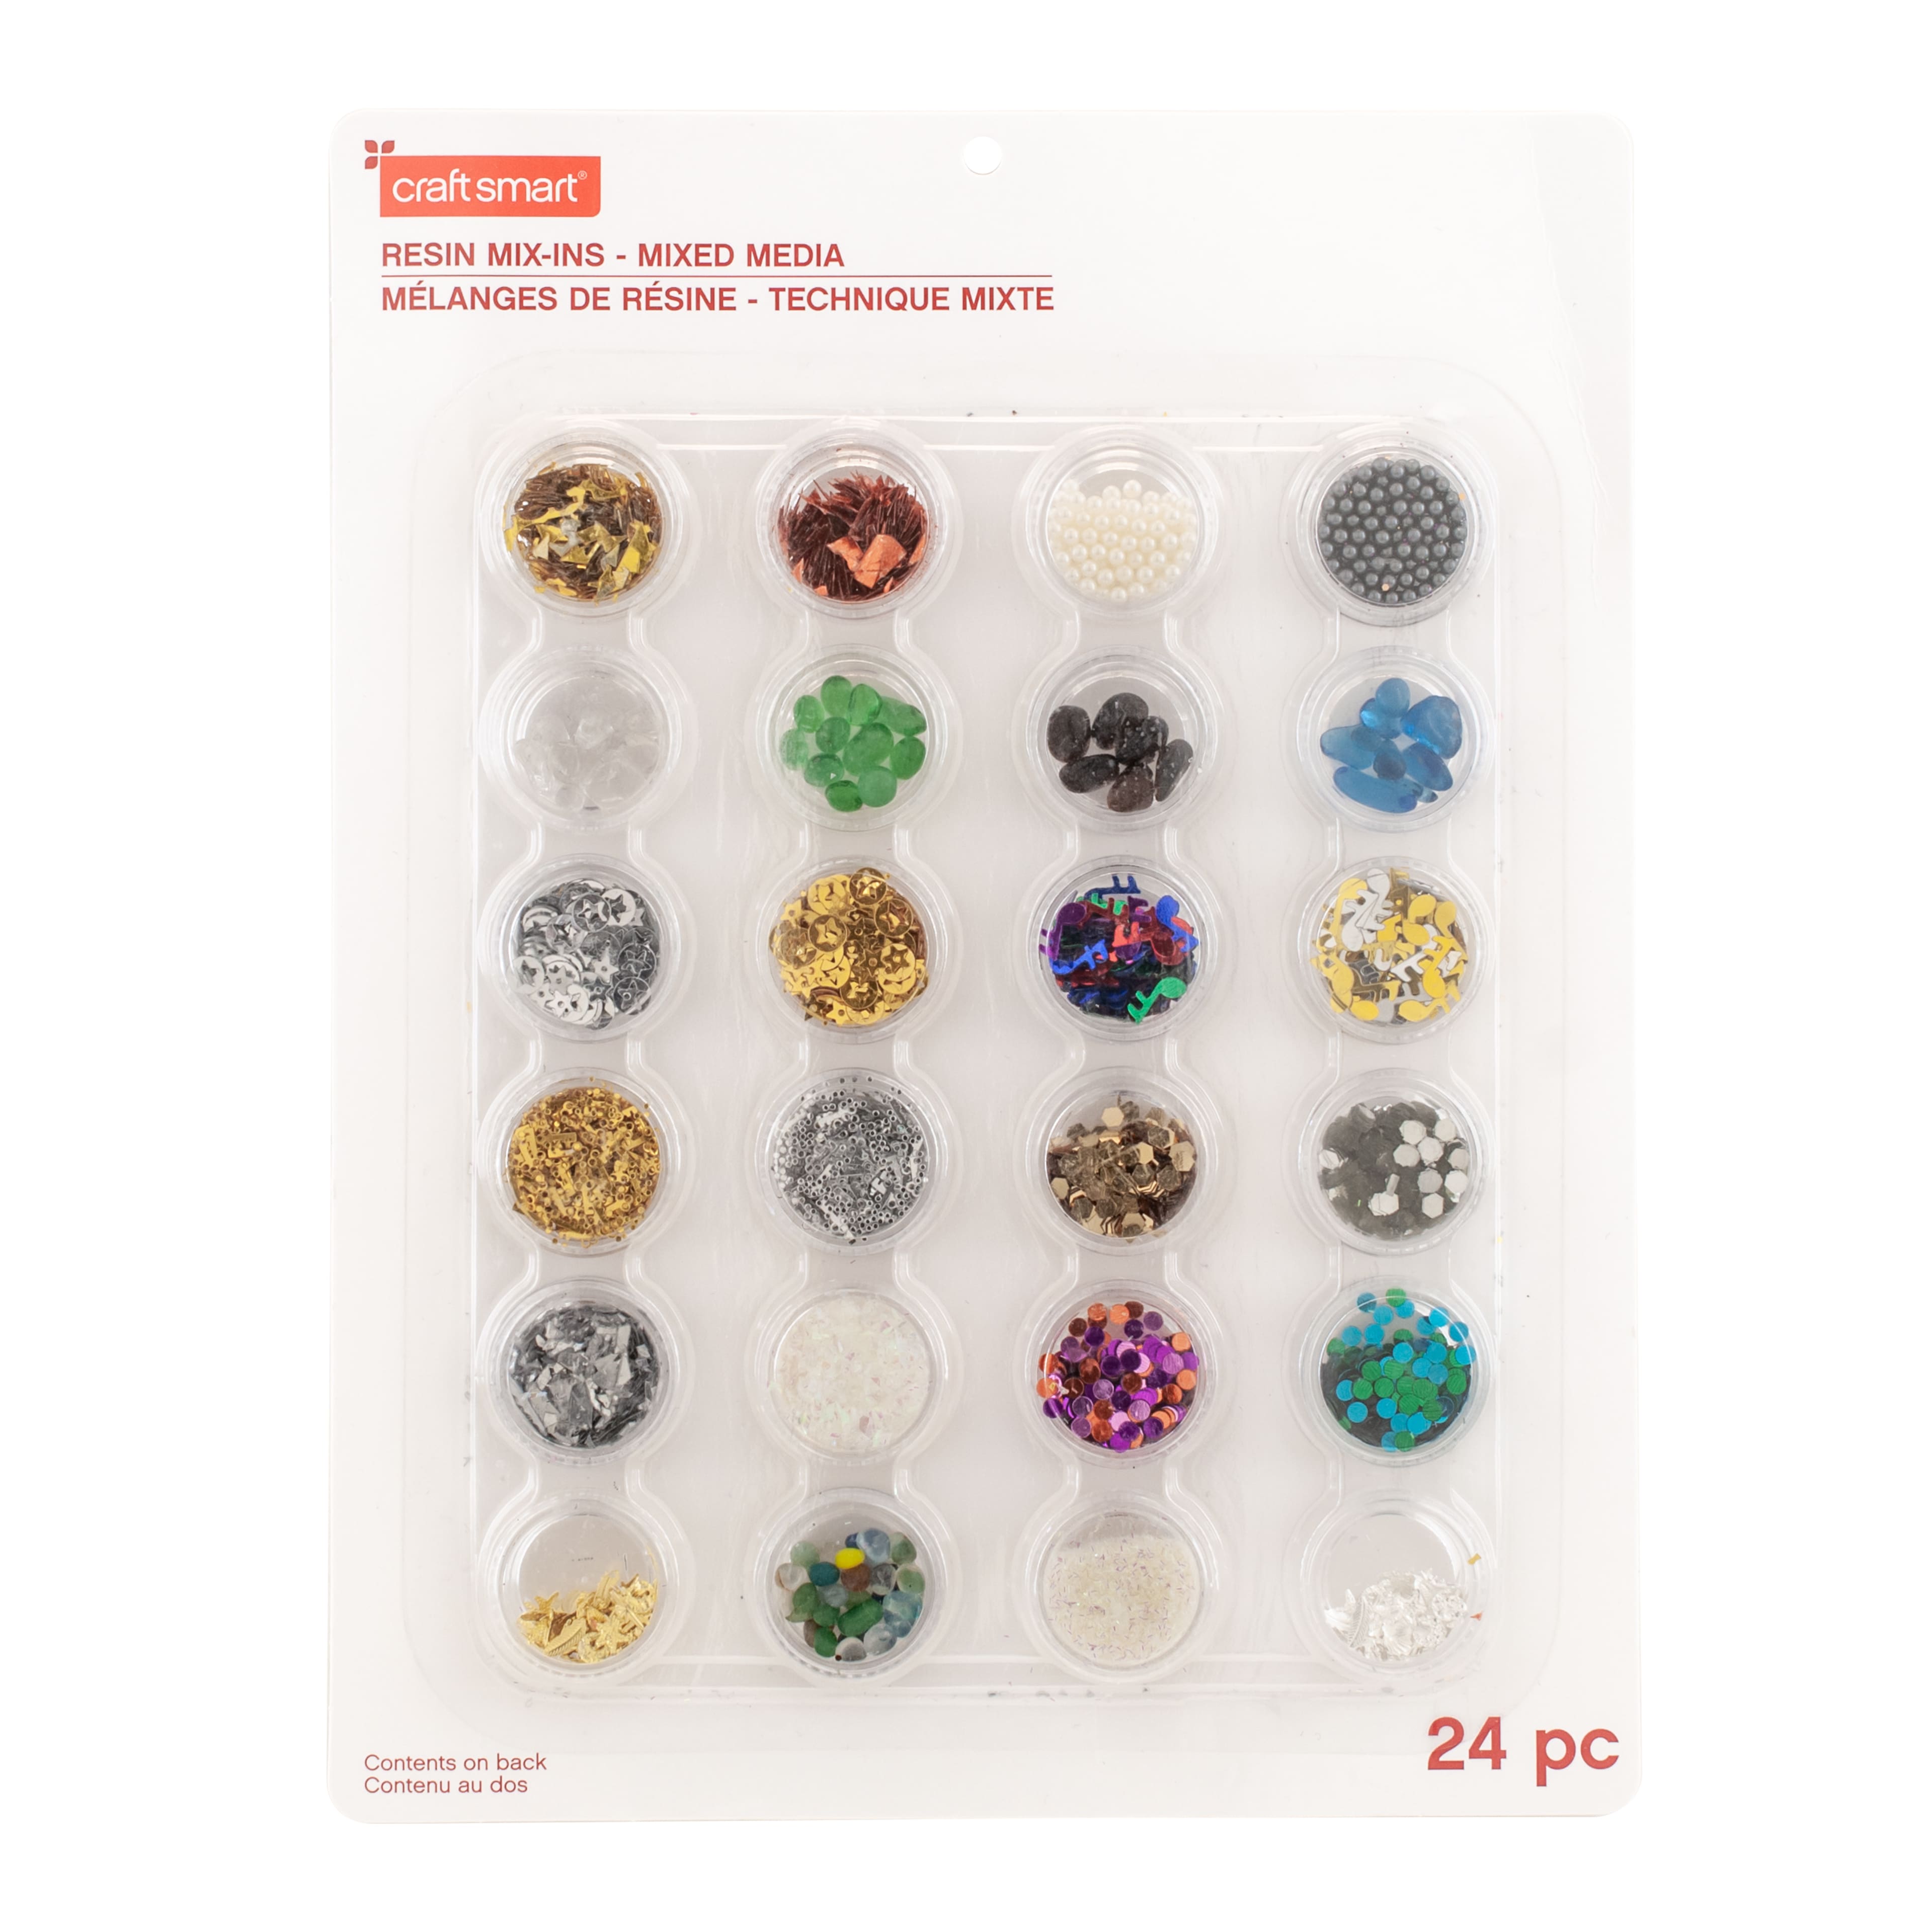 Mixed Media Resin Mix-Ins by Craft Smart®, 24ct.